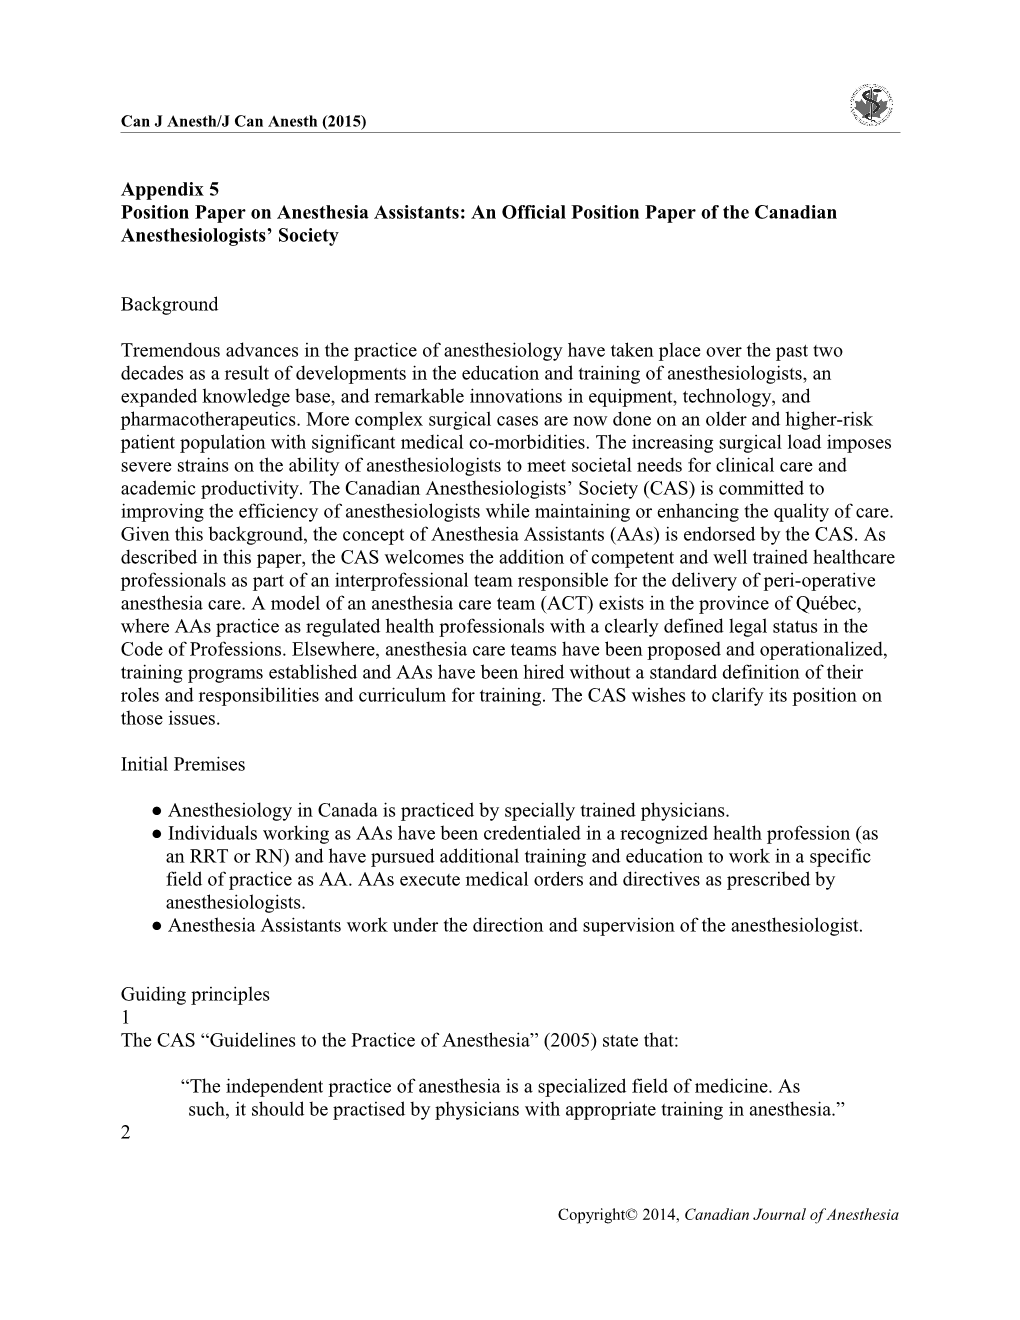 Position Paper on Anesthesia Assistants: an Official Position Paper of the Canadian